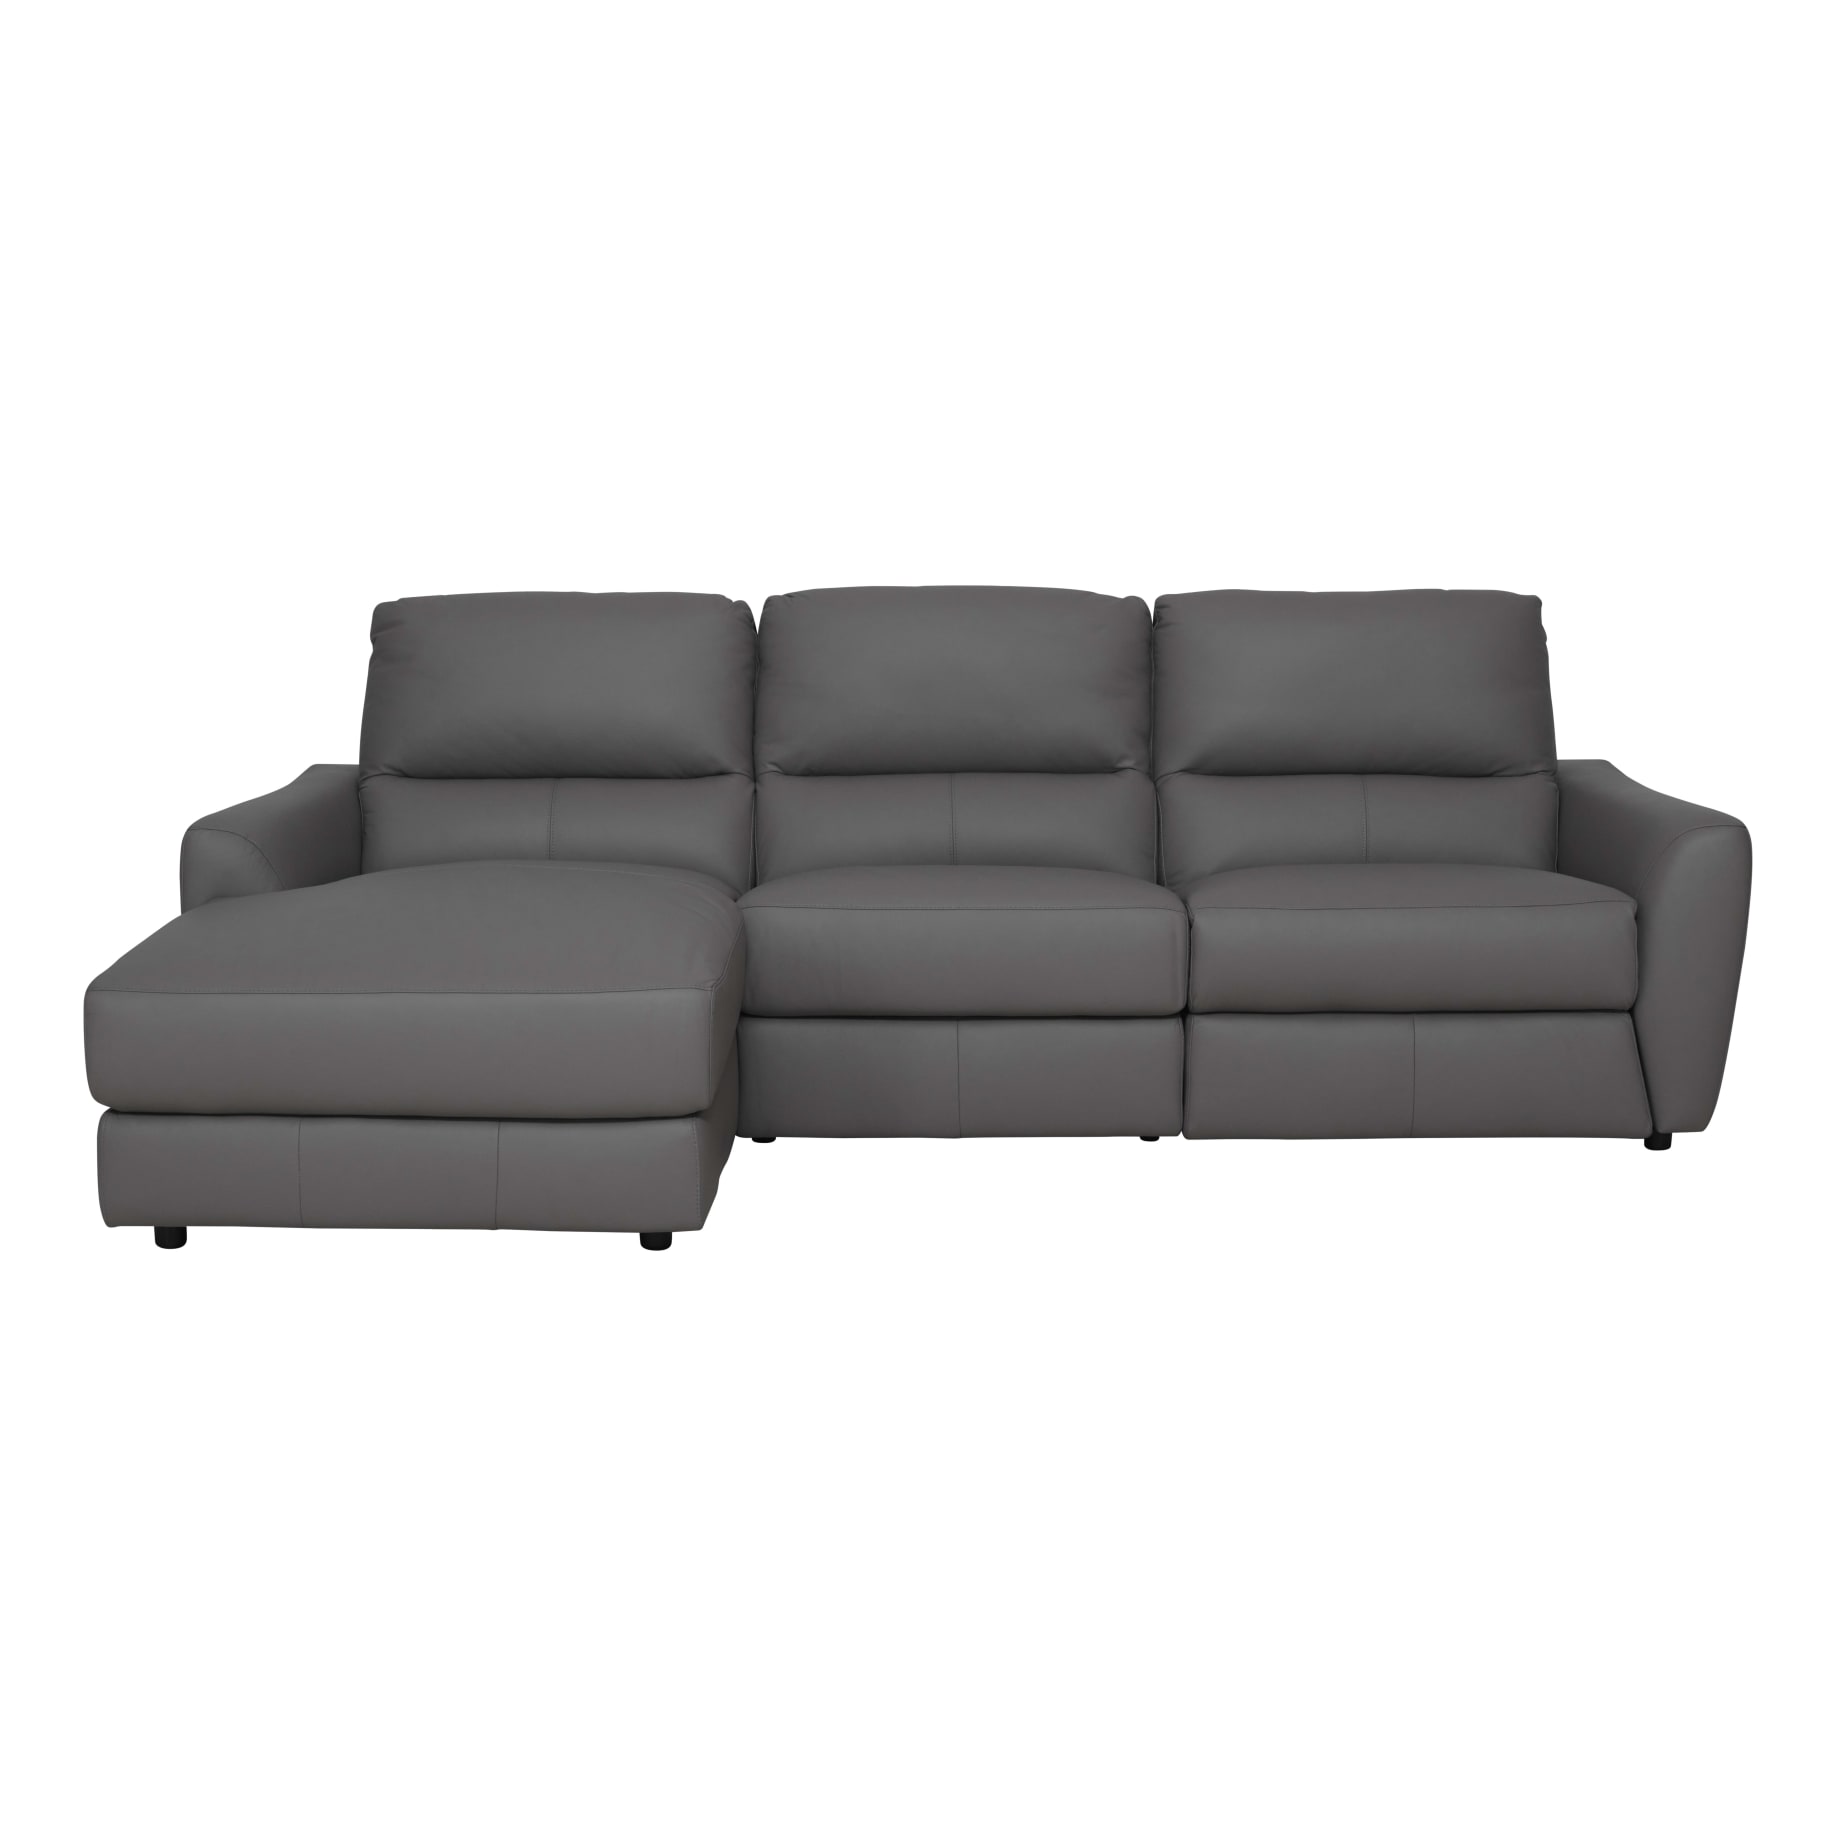 Portland 3 Seater Recliner Sofa + Chaise LHF in Leather Dark Grey